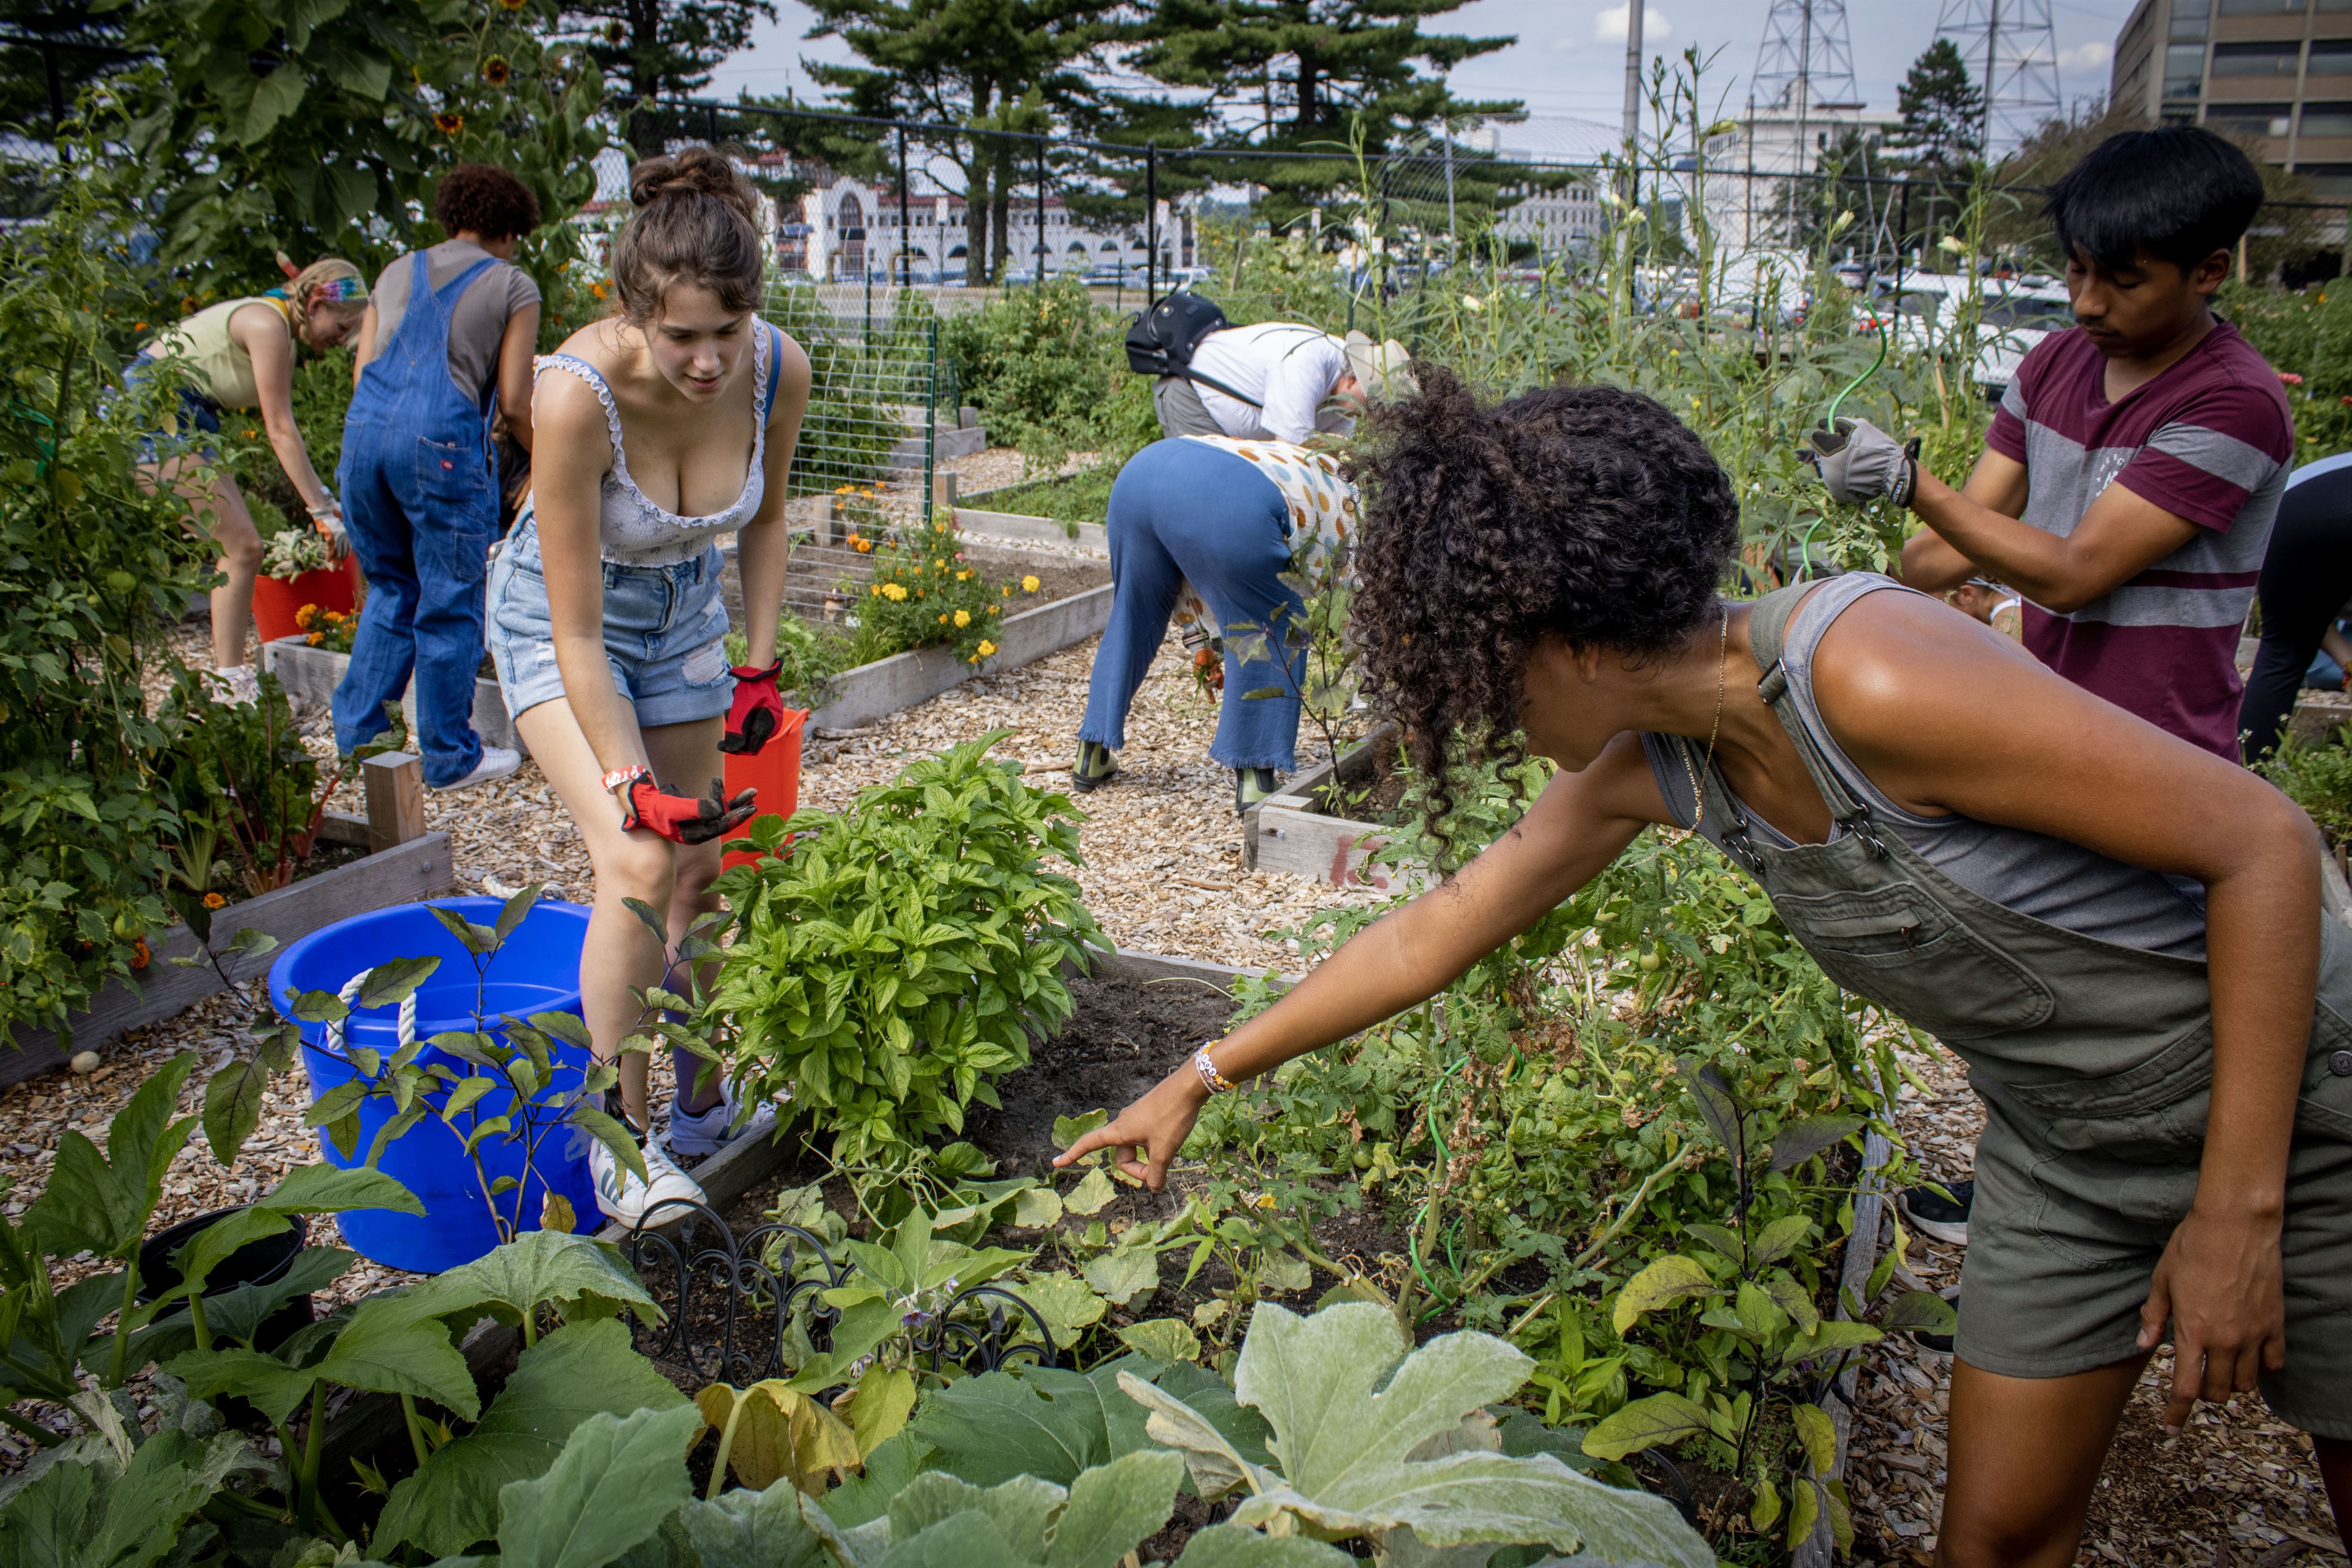 Staff member Brittney Portes, the director of the community garden, guiding students on how to properly harvest all the summer plants so they could re-plant for fall as part of their Fall Planting 101 event.
Dani Mazariegos | The Montclarion